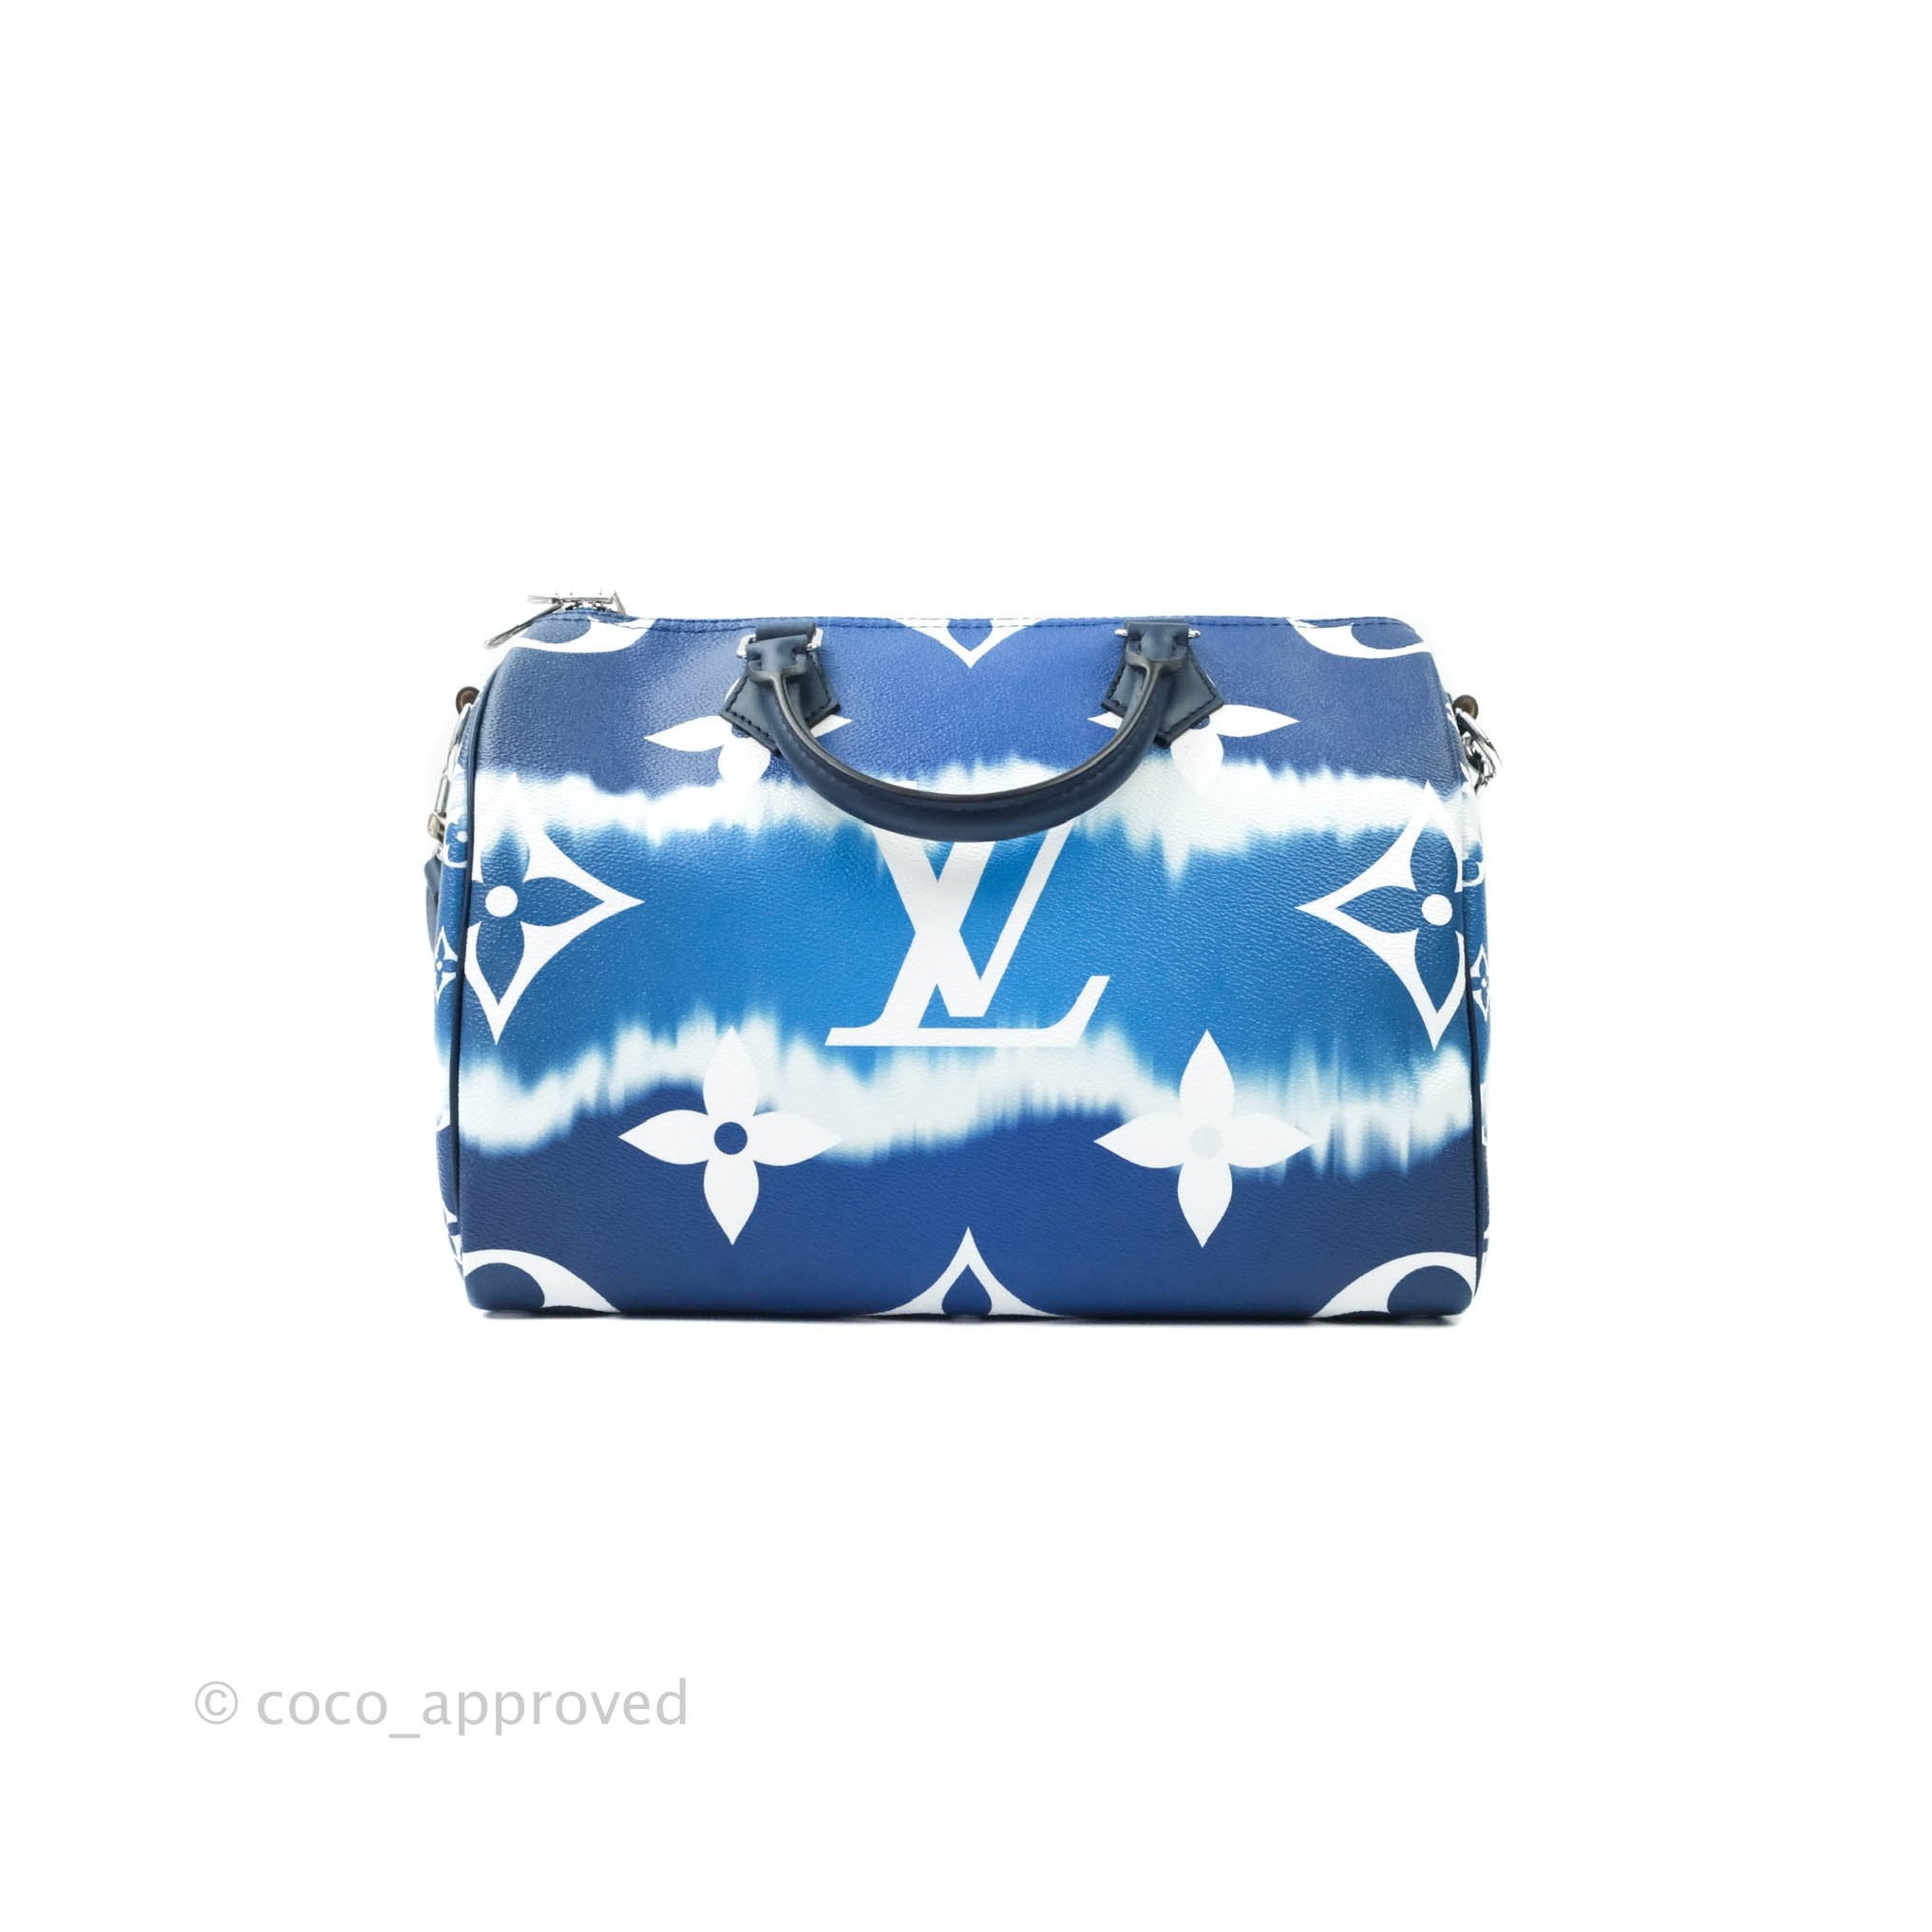 An Inside Look At Louis Vuitton's LV Escale Collection